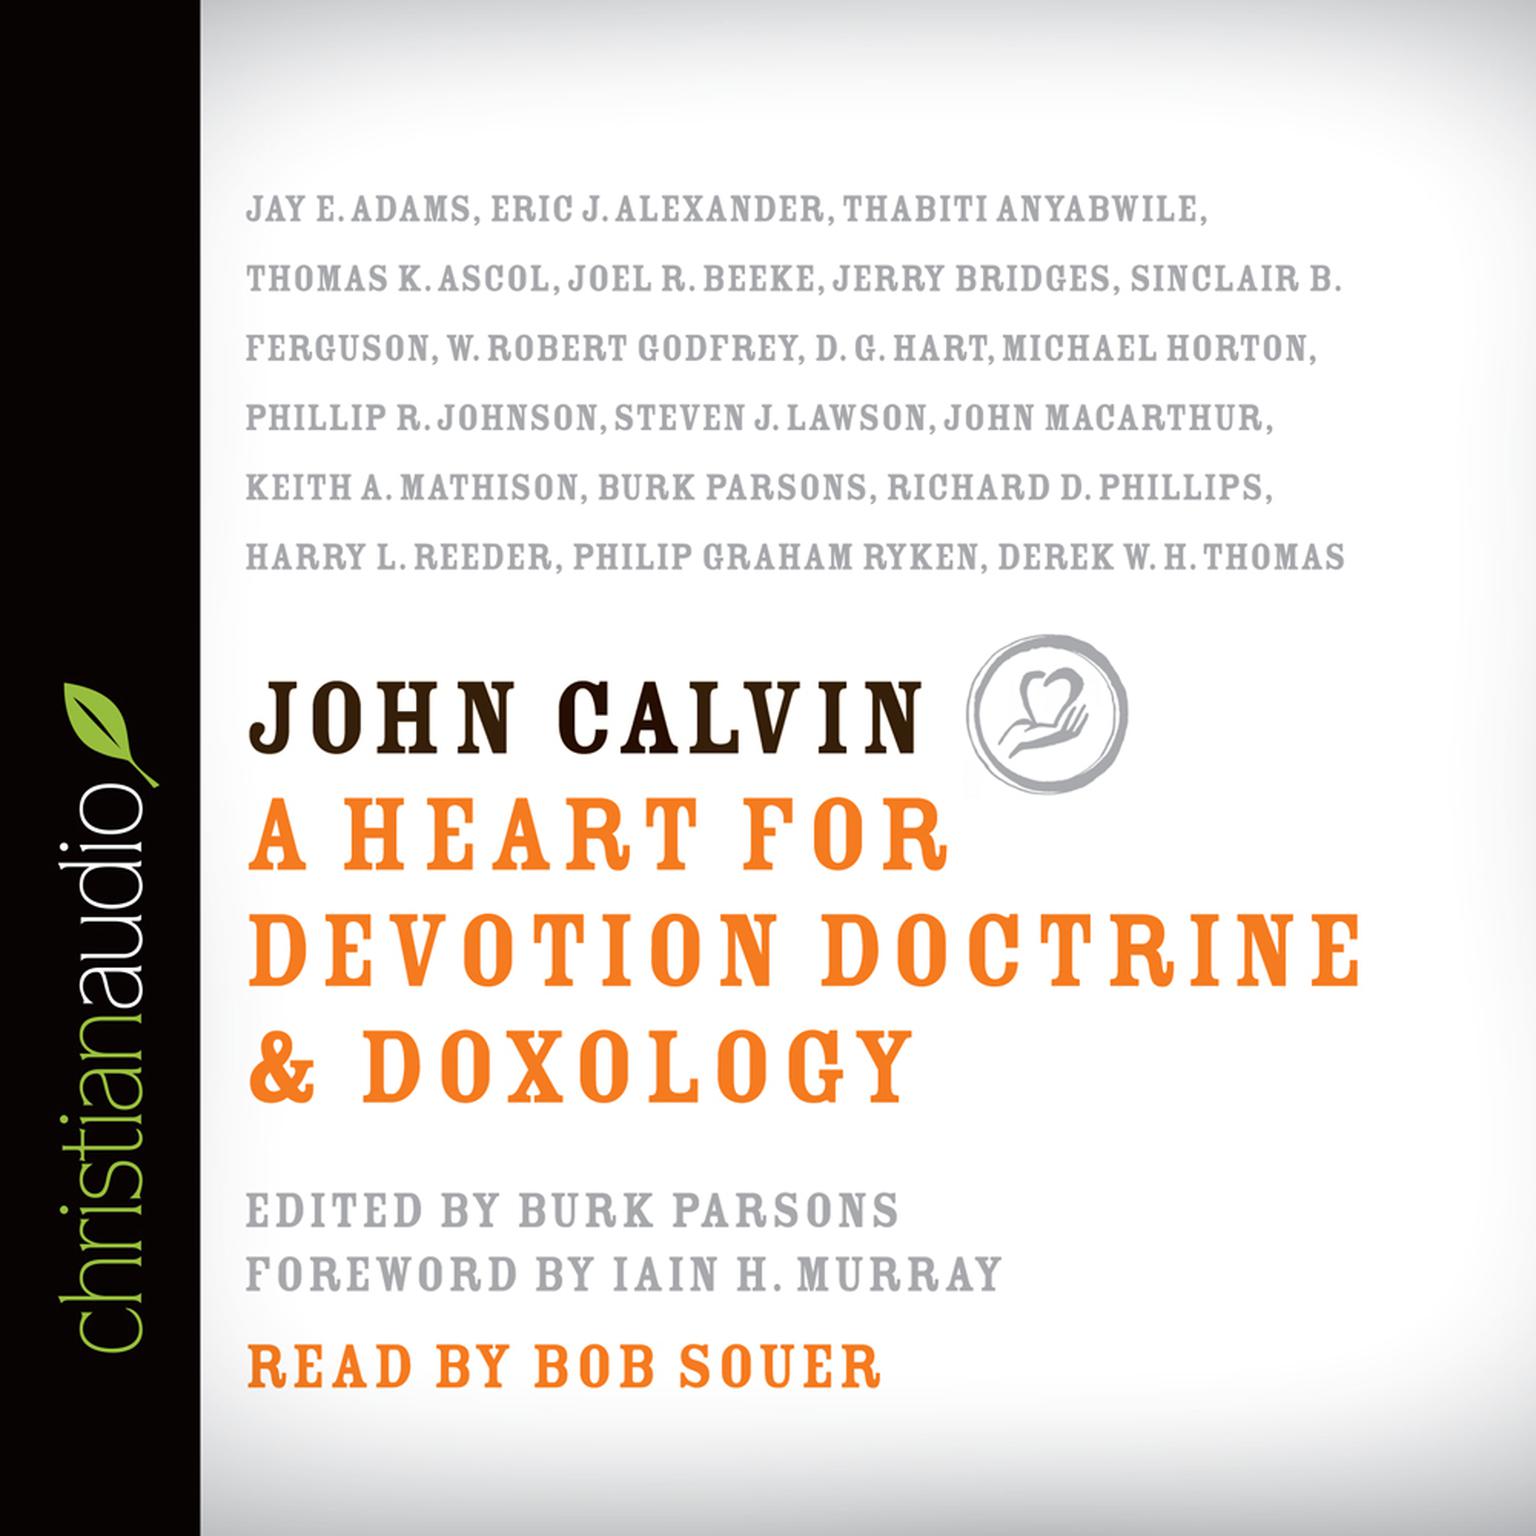 John Calvin: A Heart for Devotion, Doctrine, Doxology Audiobook, by Burk Parsons